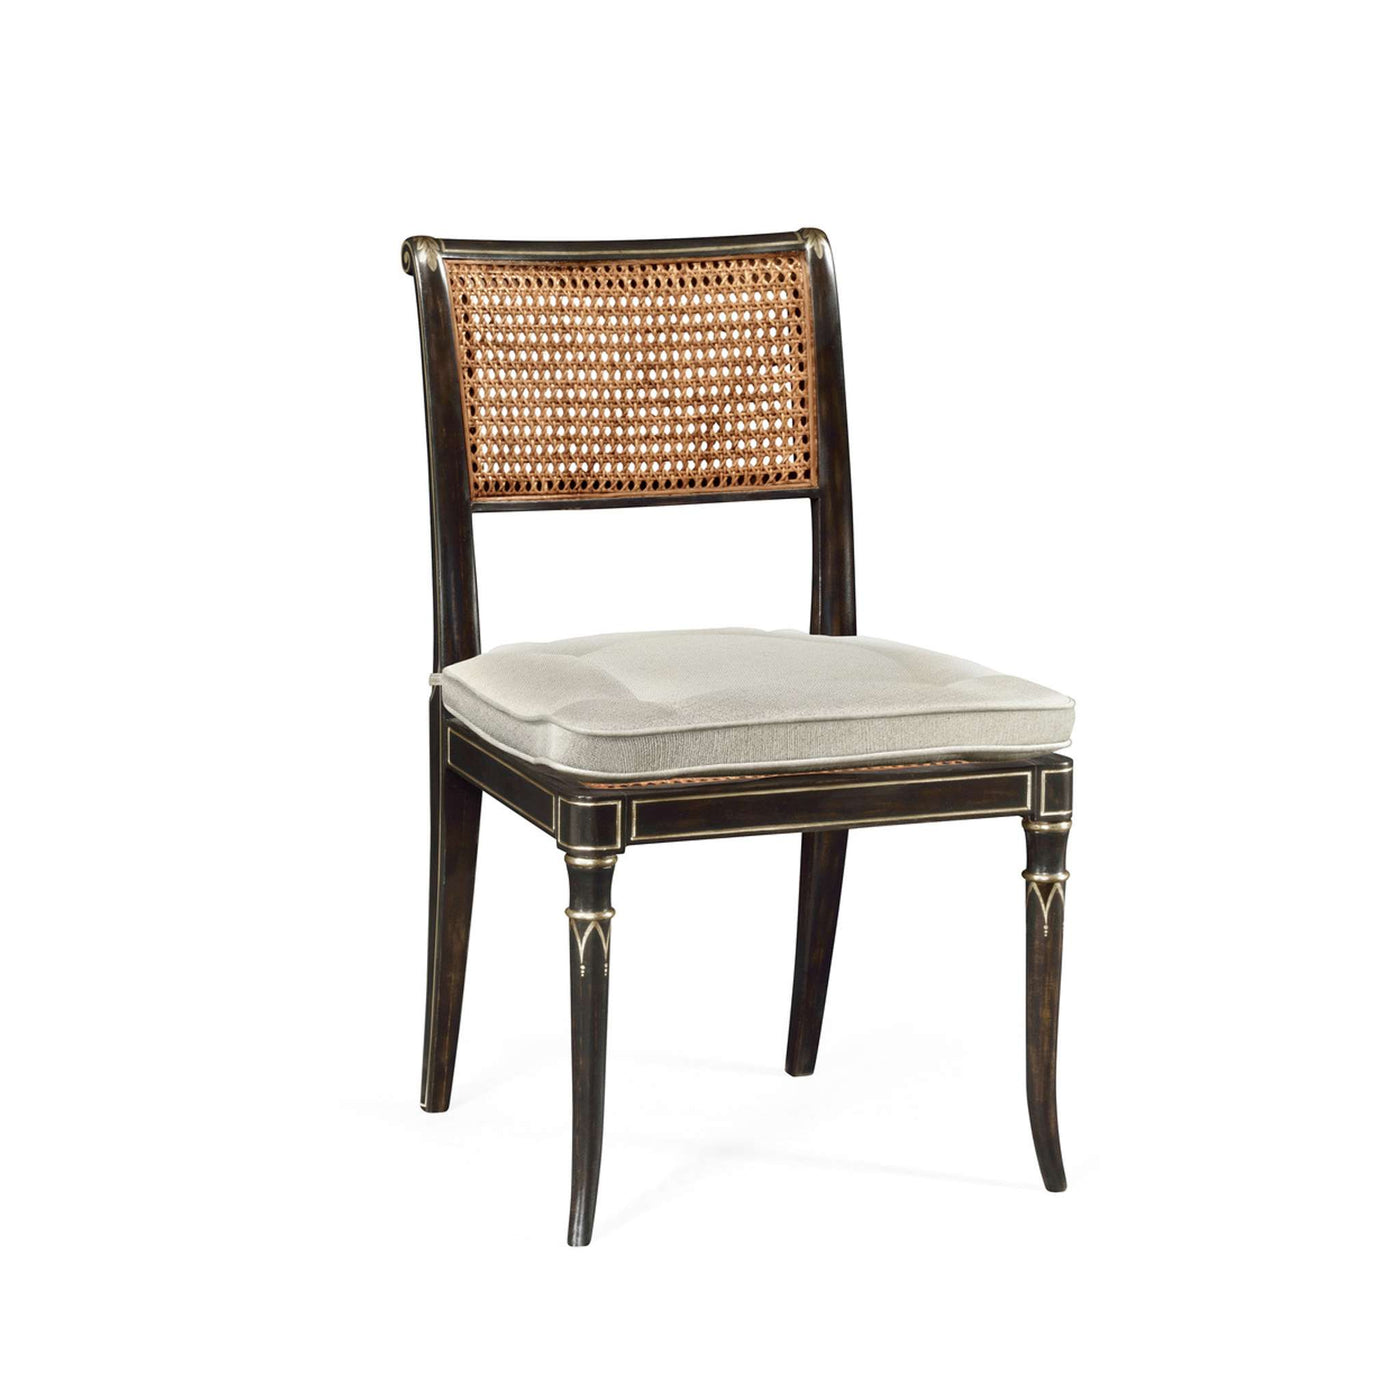 William Yeoward Linden Charcoal Wash Dining Side Chair